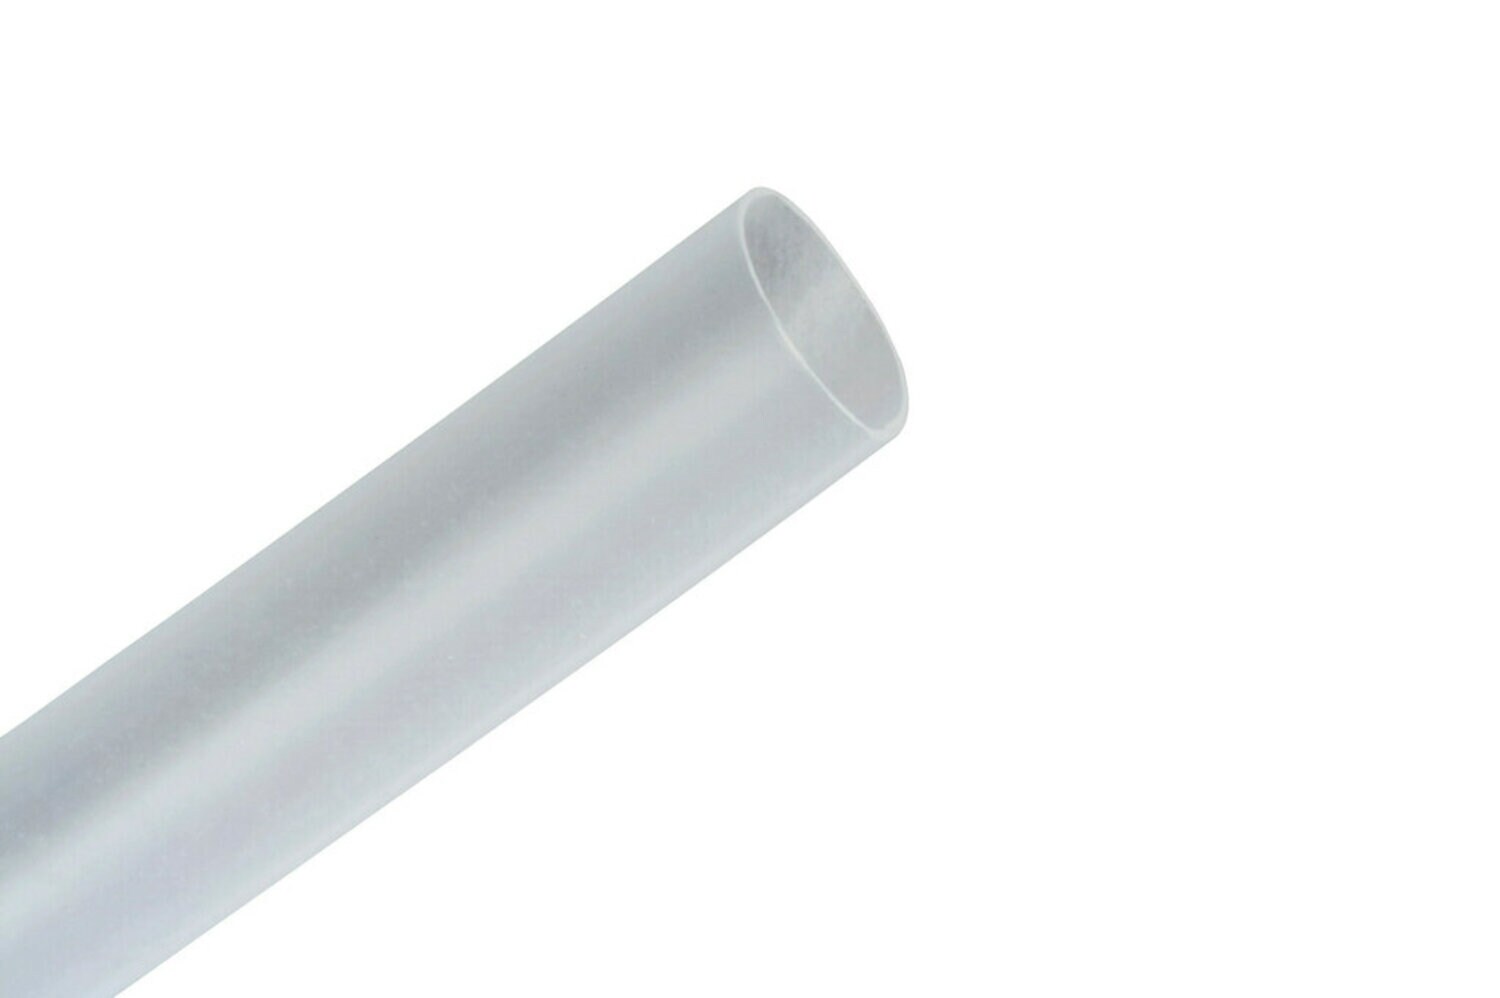 7010319286 - 3M Heat Shrink Thin-Wall Tubing FP-301-3/64-Clear-100`: 100 ft spool
length, 300 ft/case